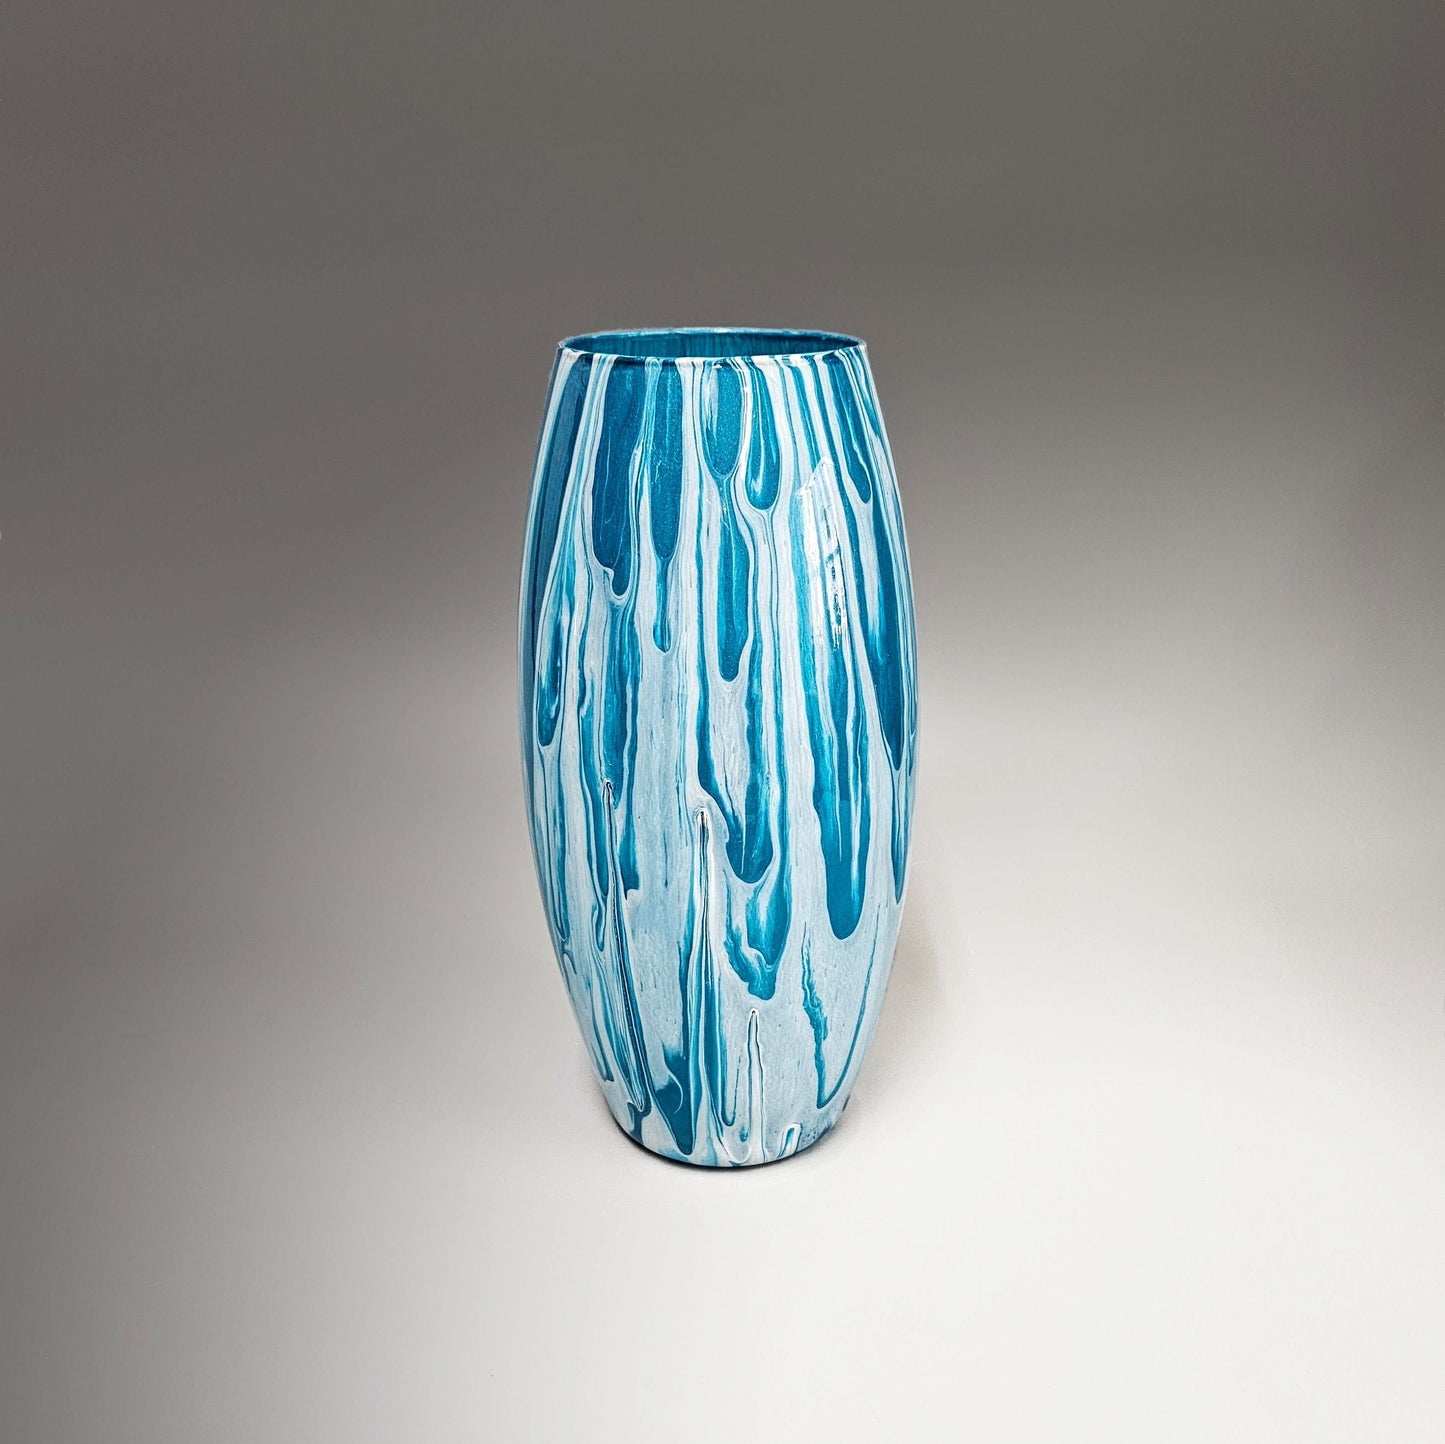 Abstract Glass Vase in Teal and Pearl White